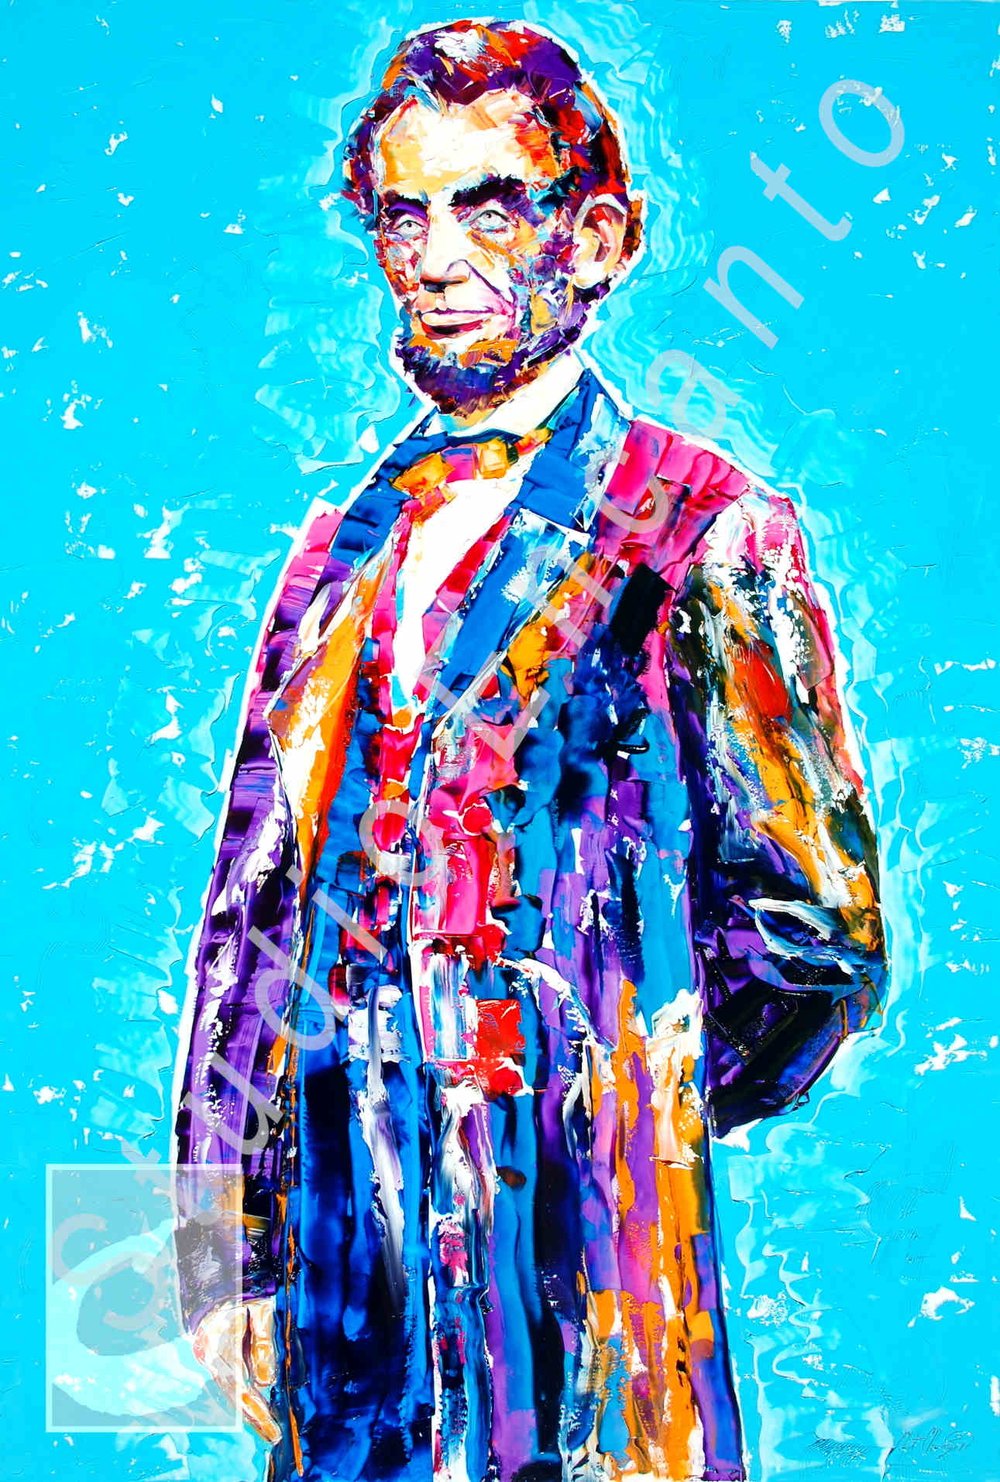 Image of LINCOLN: Coat of Many Colors by Cathee "Cat" Clausen